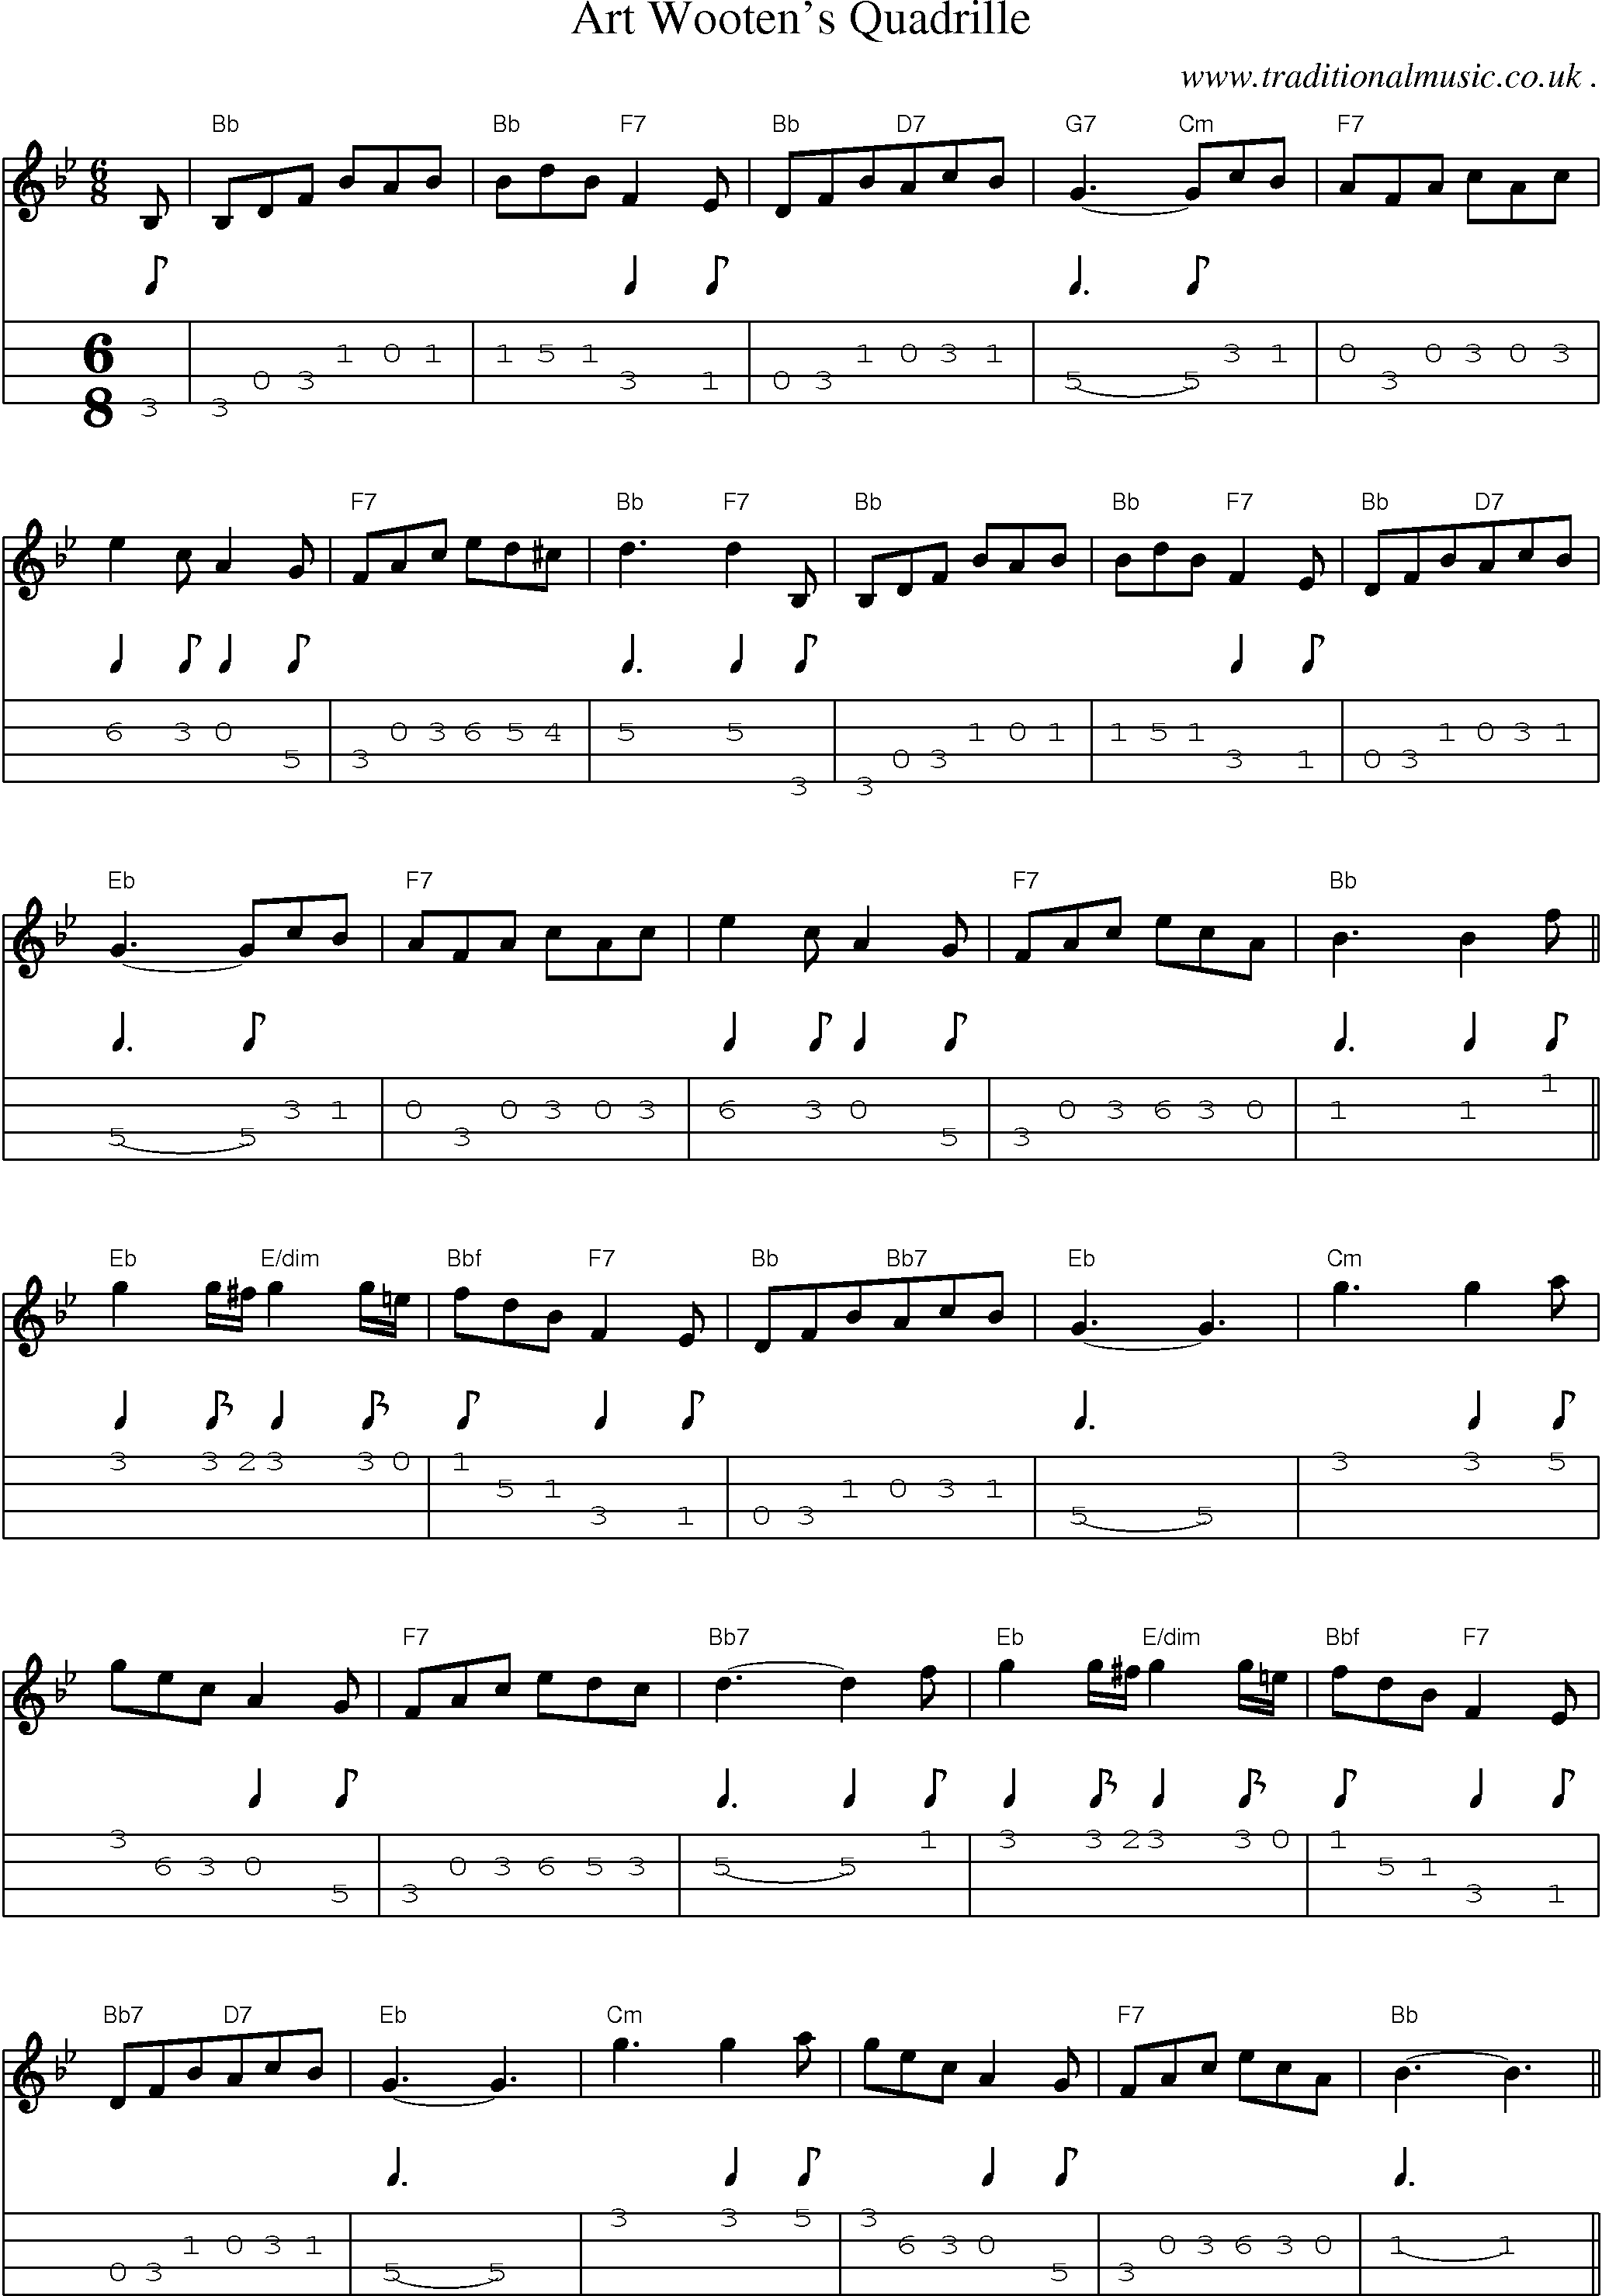 Sheet-Music and Mandolin Tabs for Art Wootens Quadrille